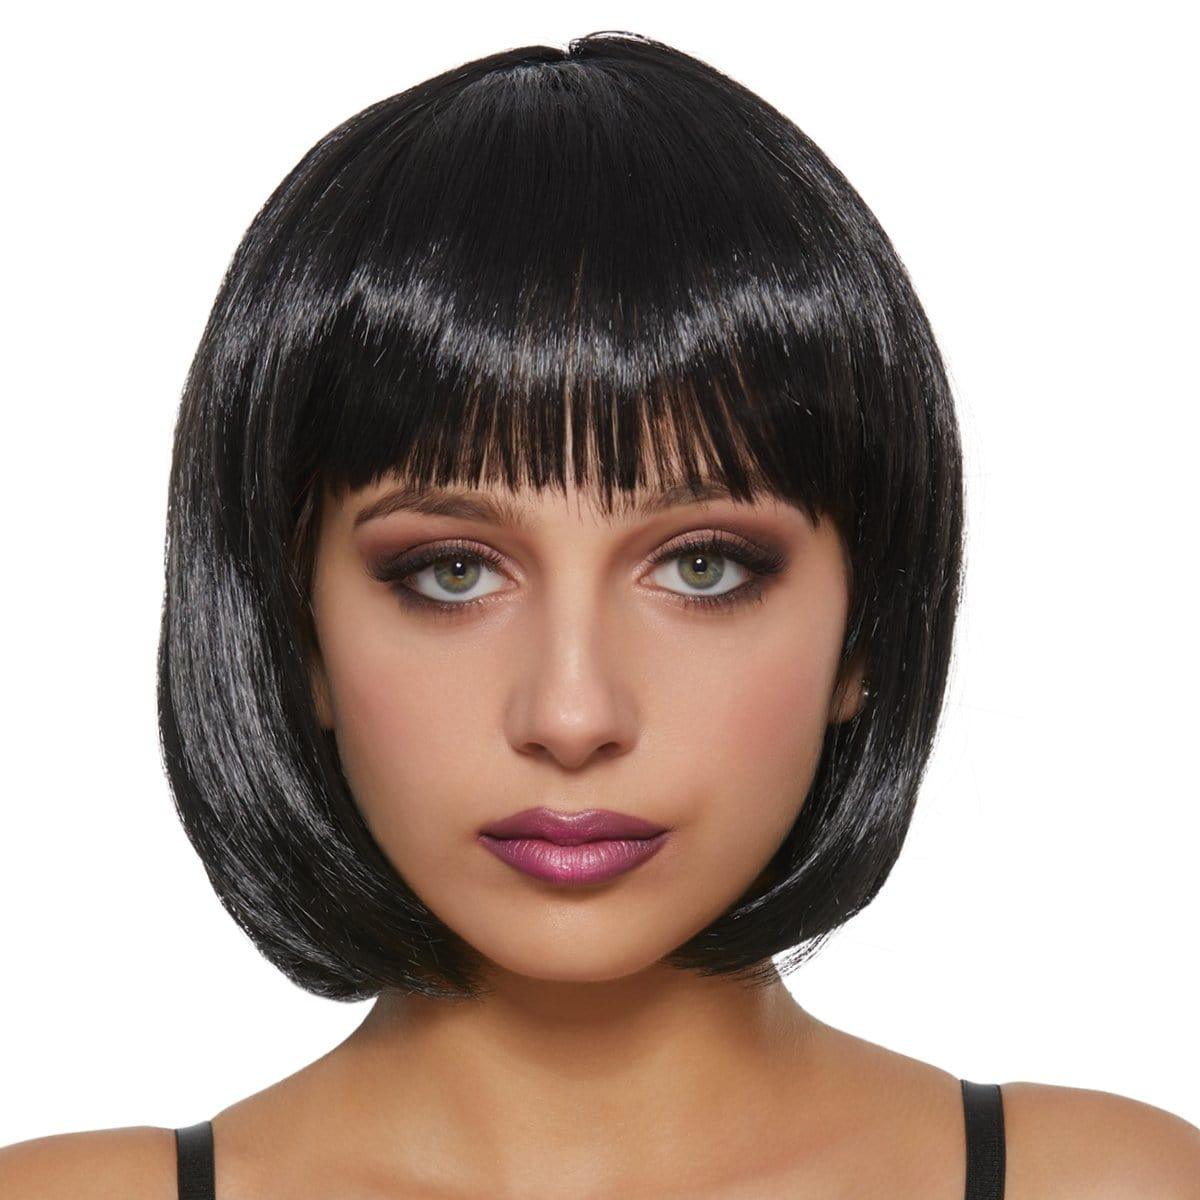 Buy Costume Accessories Black Daisy wig for women sold at Party Expert